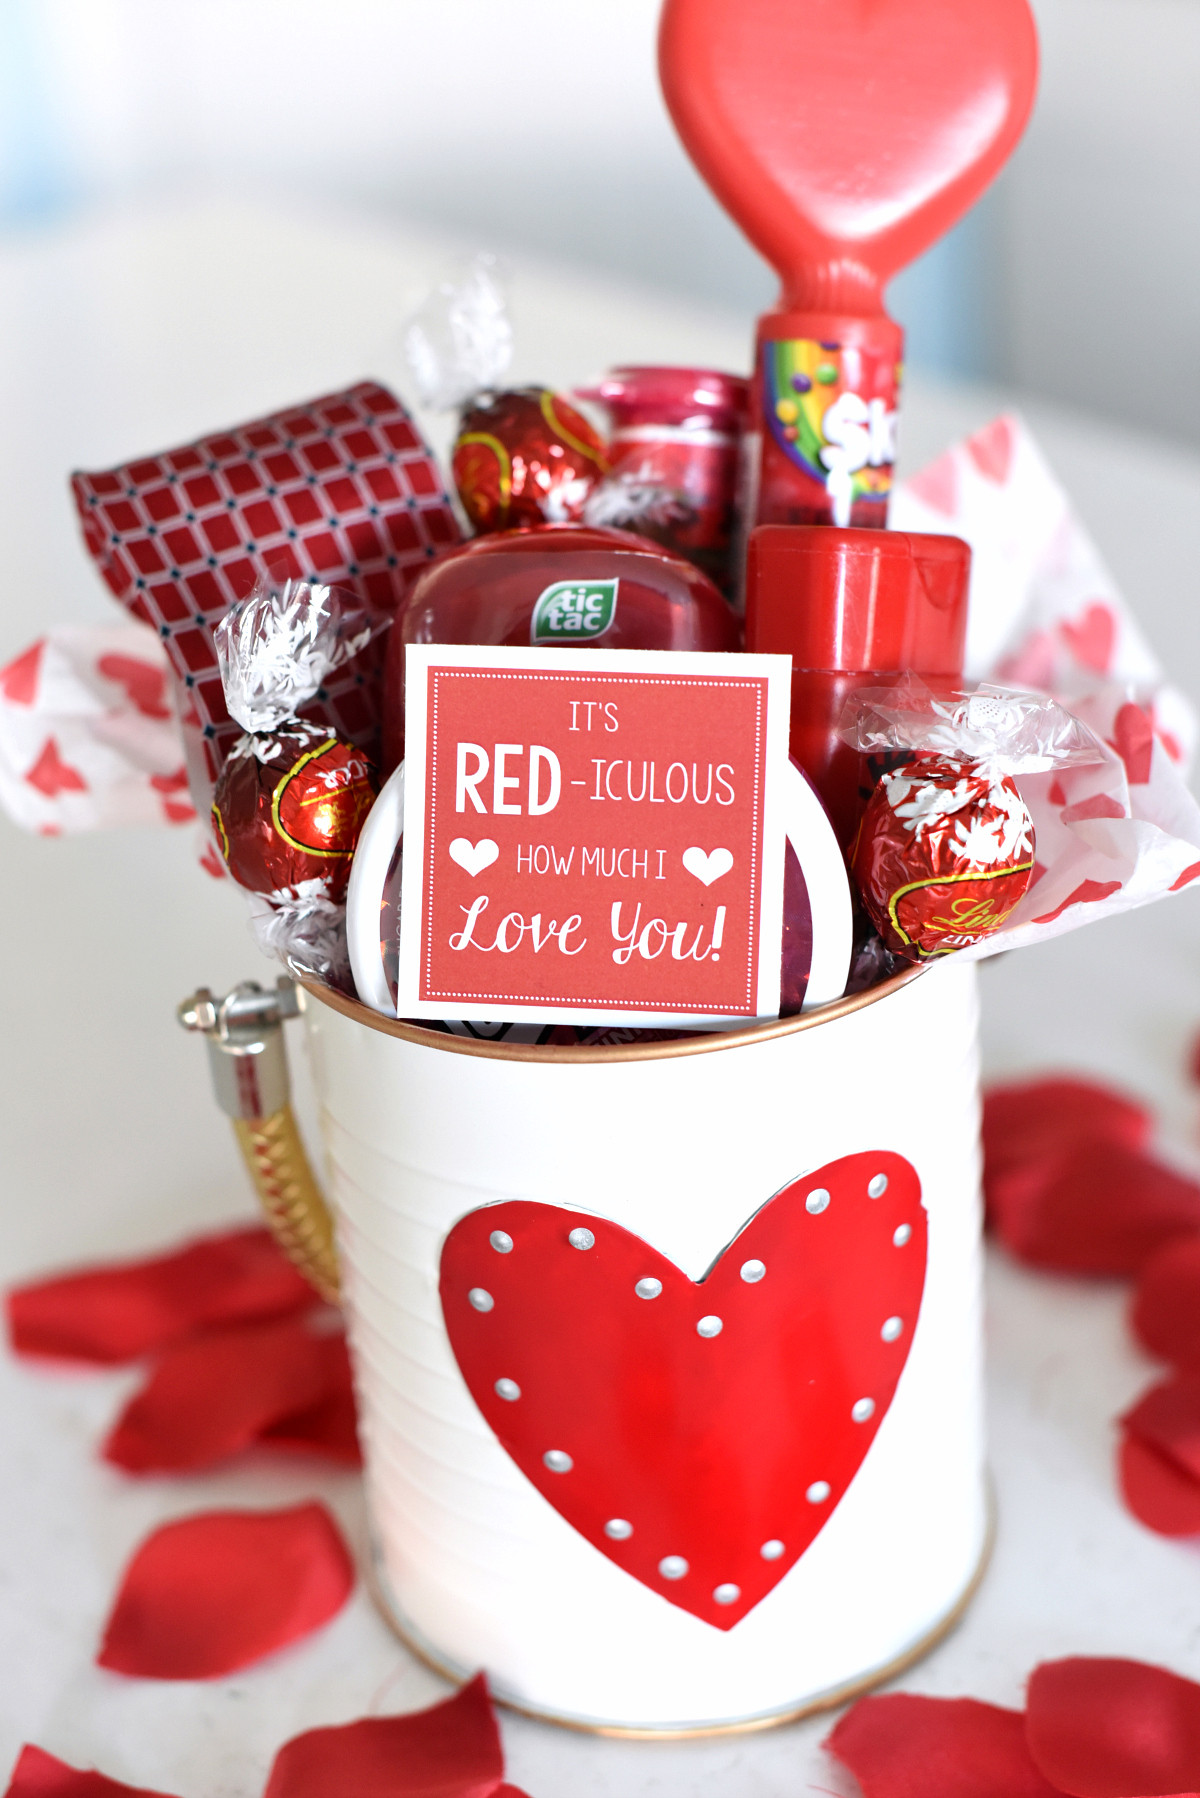 Valentines Gift For Her Ideas
 25 DIY Valentine s Day Gift Ideas Teens Will Love